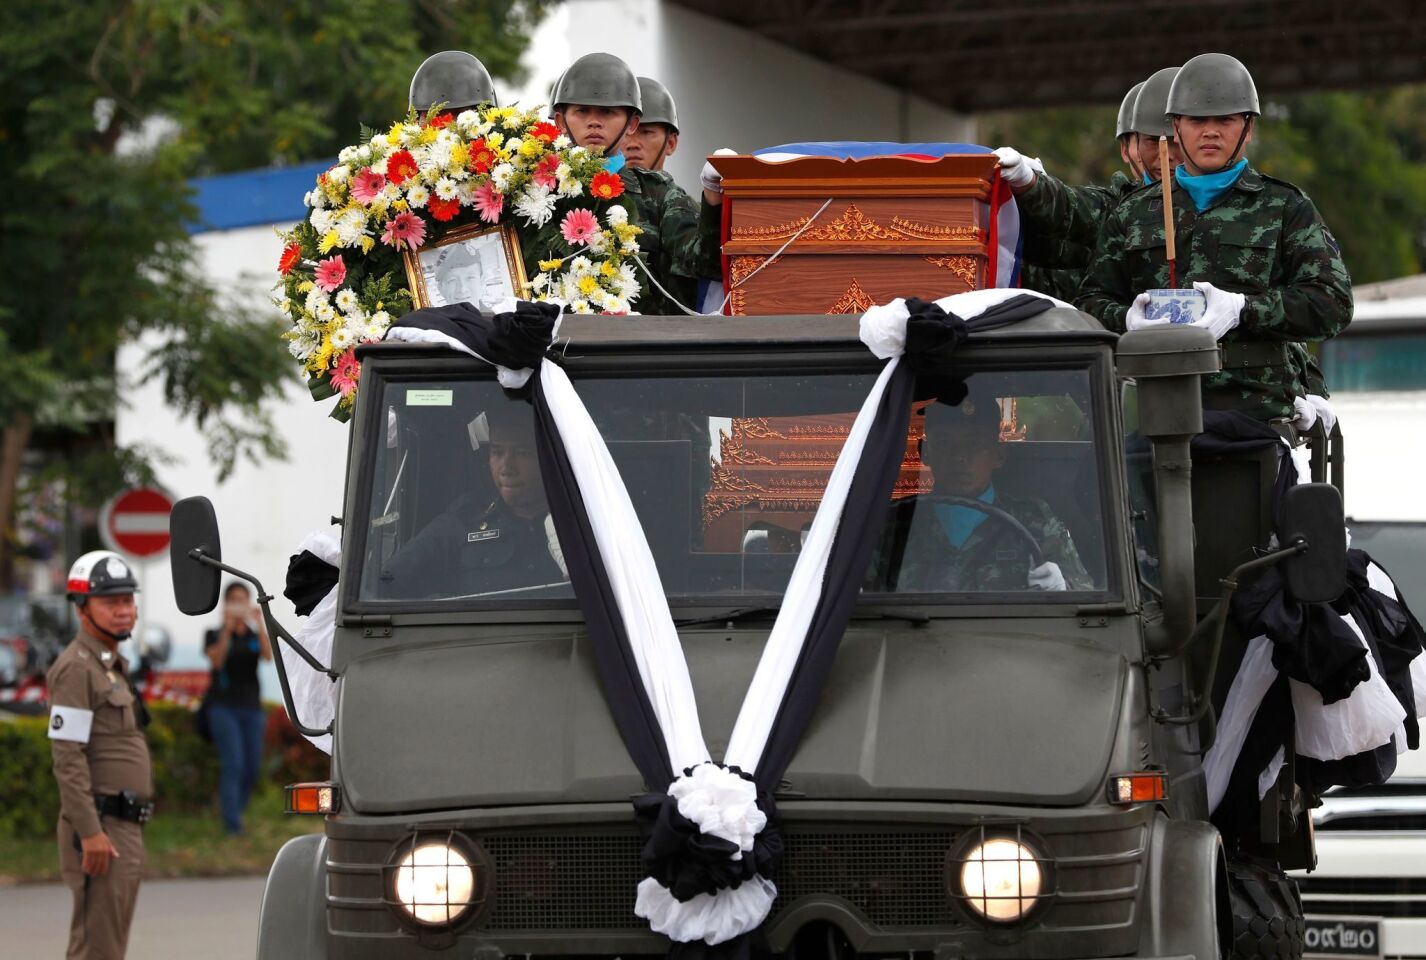 Thai military honor guards transport a coffin containing the remains of former Thai Navy Seal Petty Officer 1st Class Saman Gunan, who died in the Tham Luang cave rescue operations.